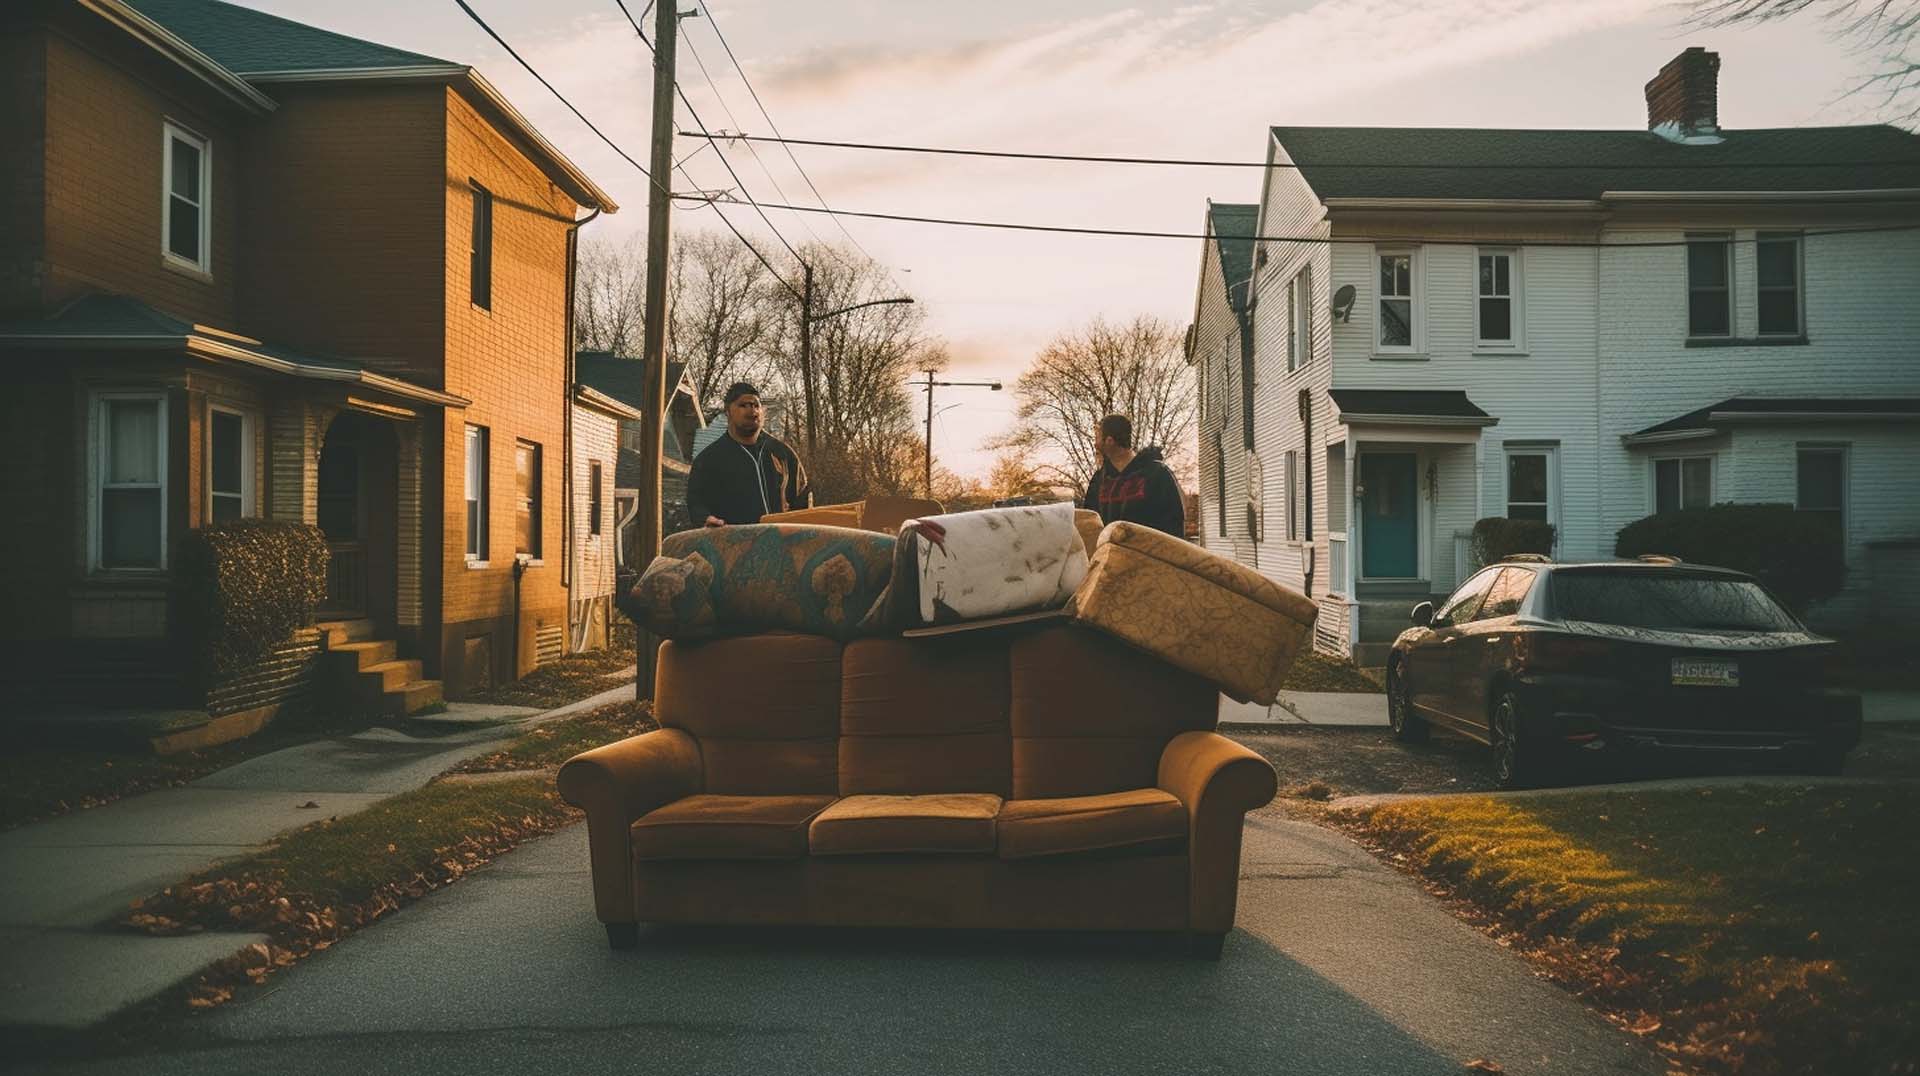 Residential Junk Removal Services in Granby